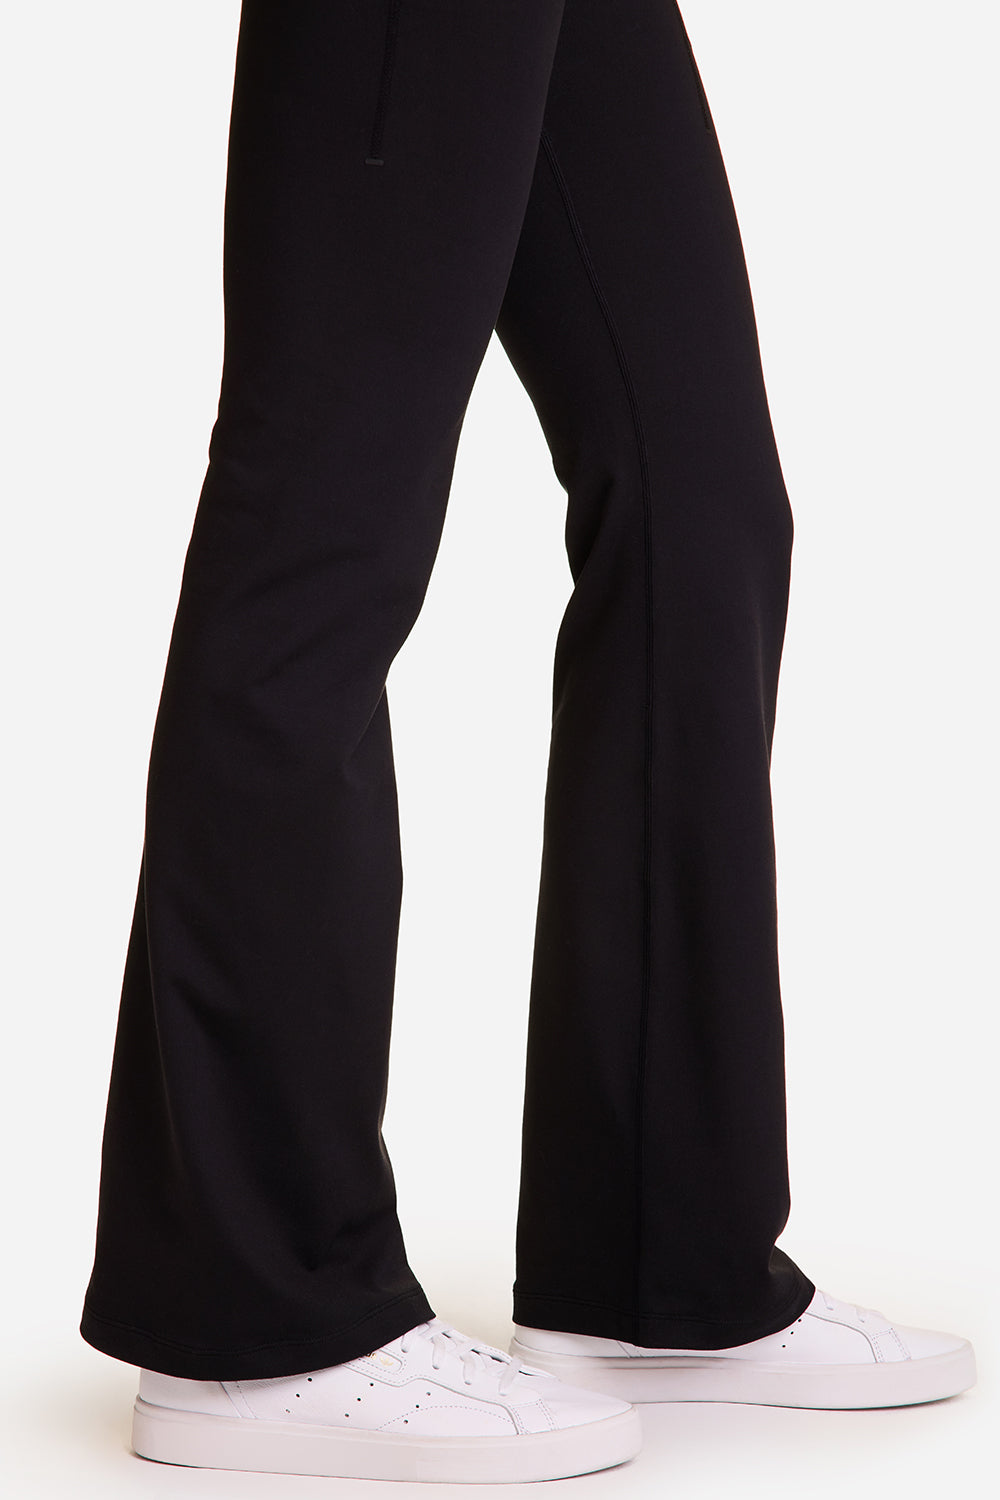 Muse by Magnolia Black High Waisted Pleated Pants